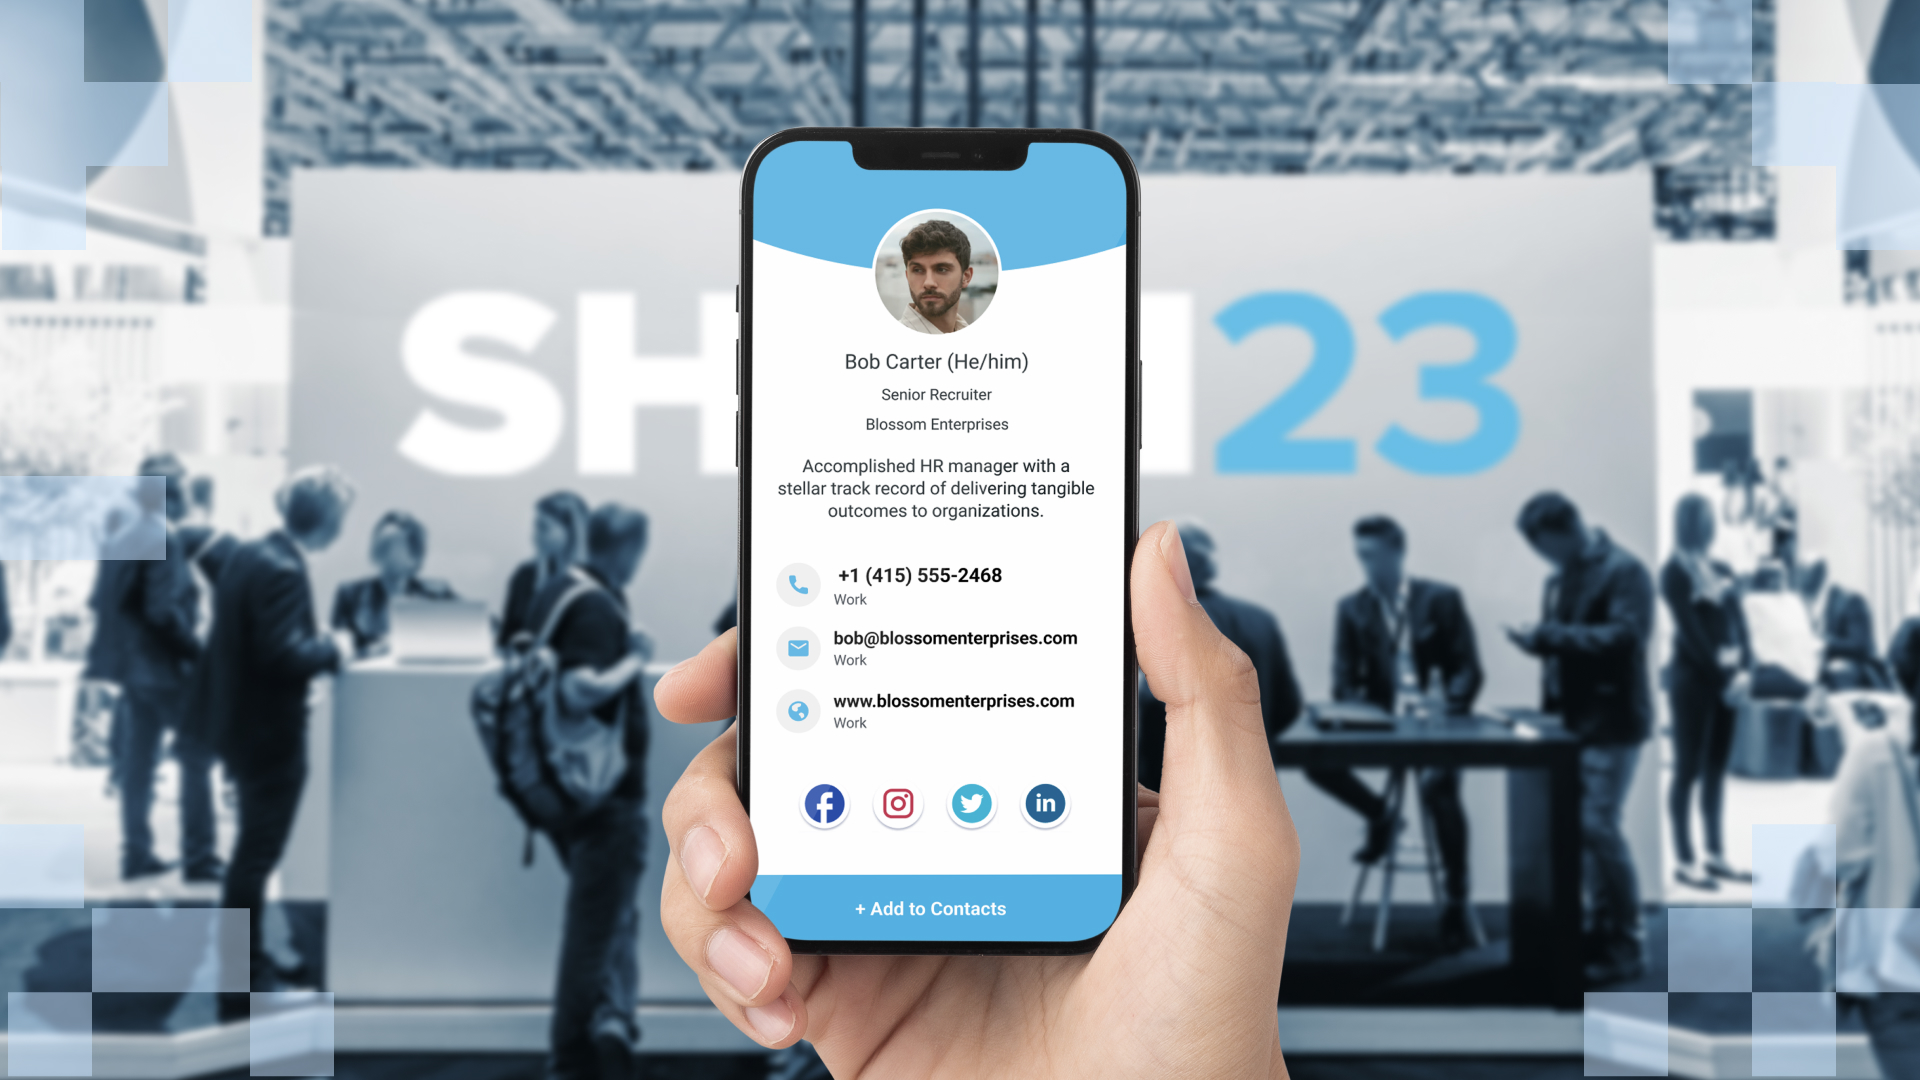 Stand Out at the SHRM Annual Conference 2023 With These 4 Networking Tips